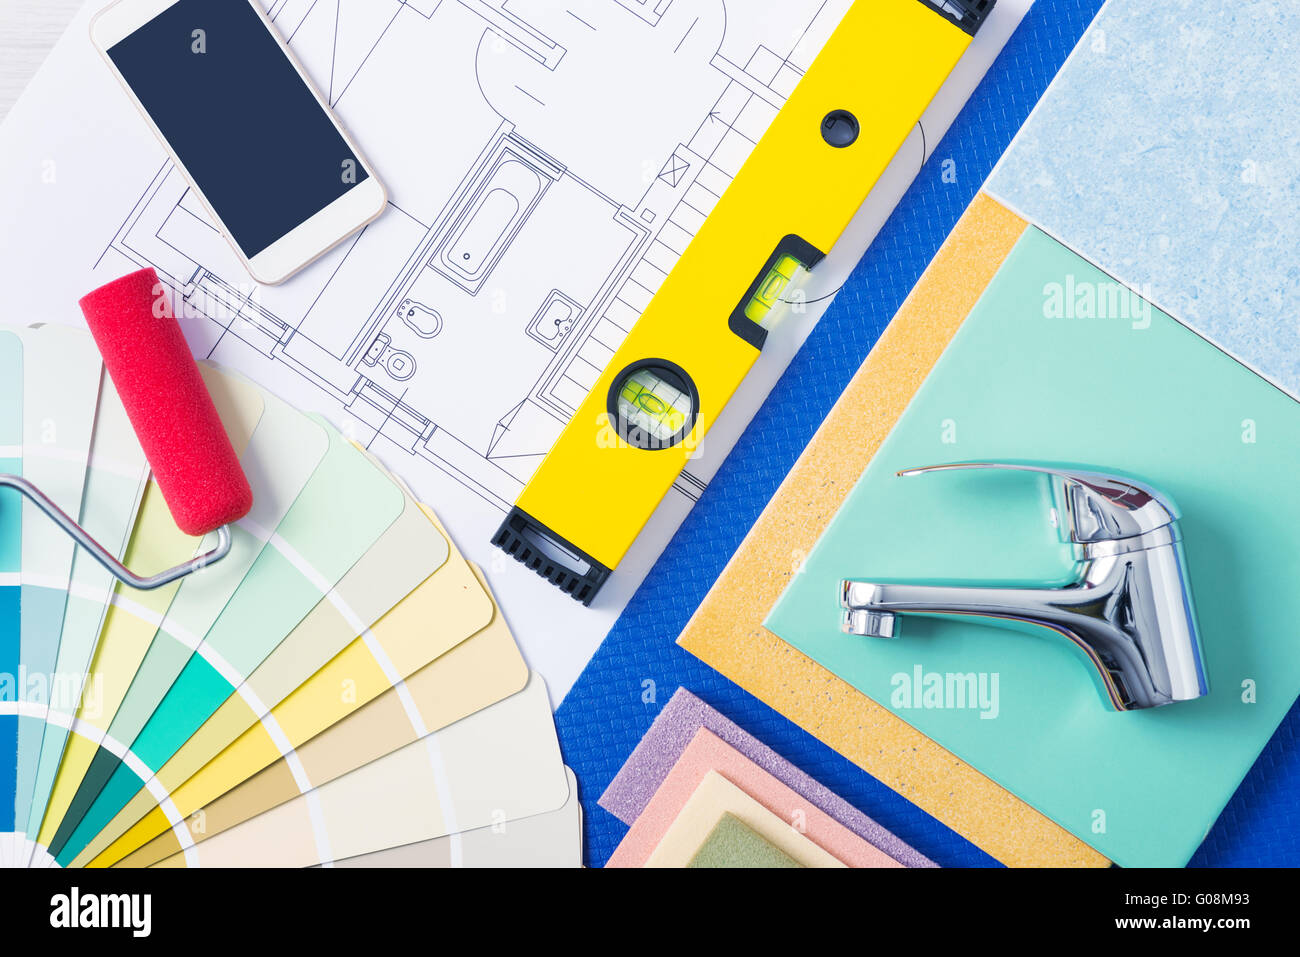 Home repair and decorating concept with color swatches, tiles, faucets and mobile phone, top view Stock Photo